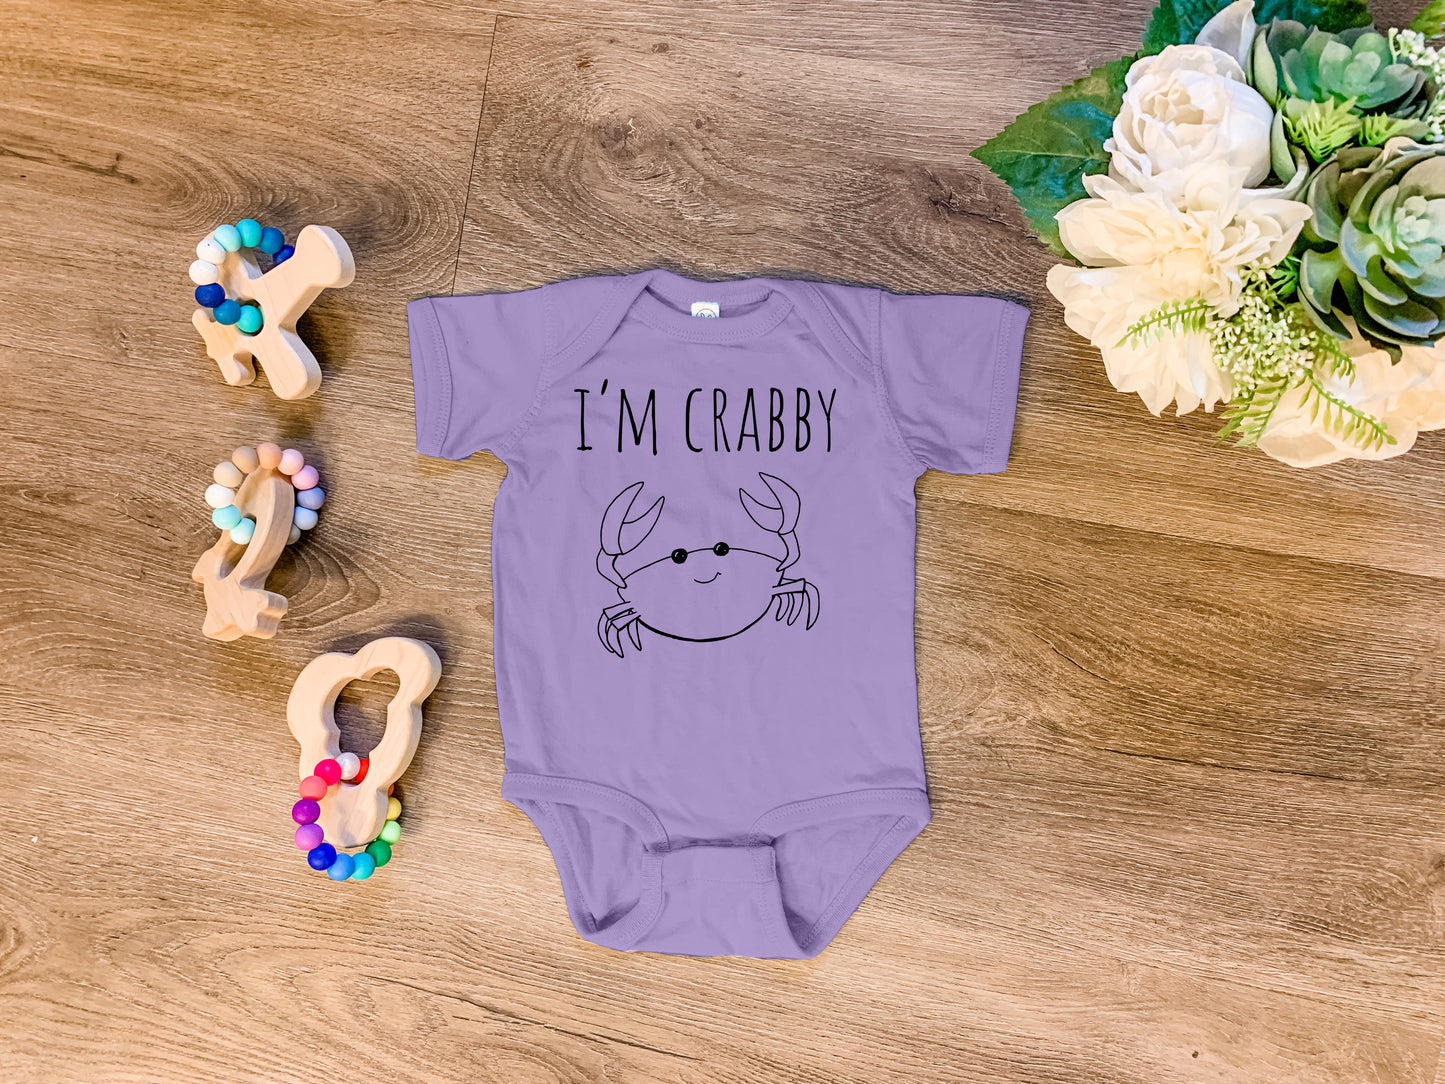 I'm Crabby - Onesie - Heather Gray, Chill, or Lavender